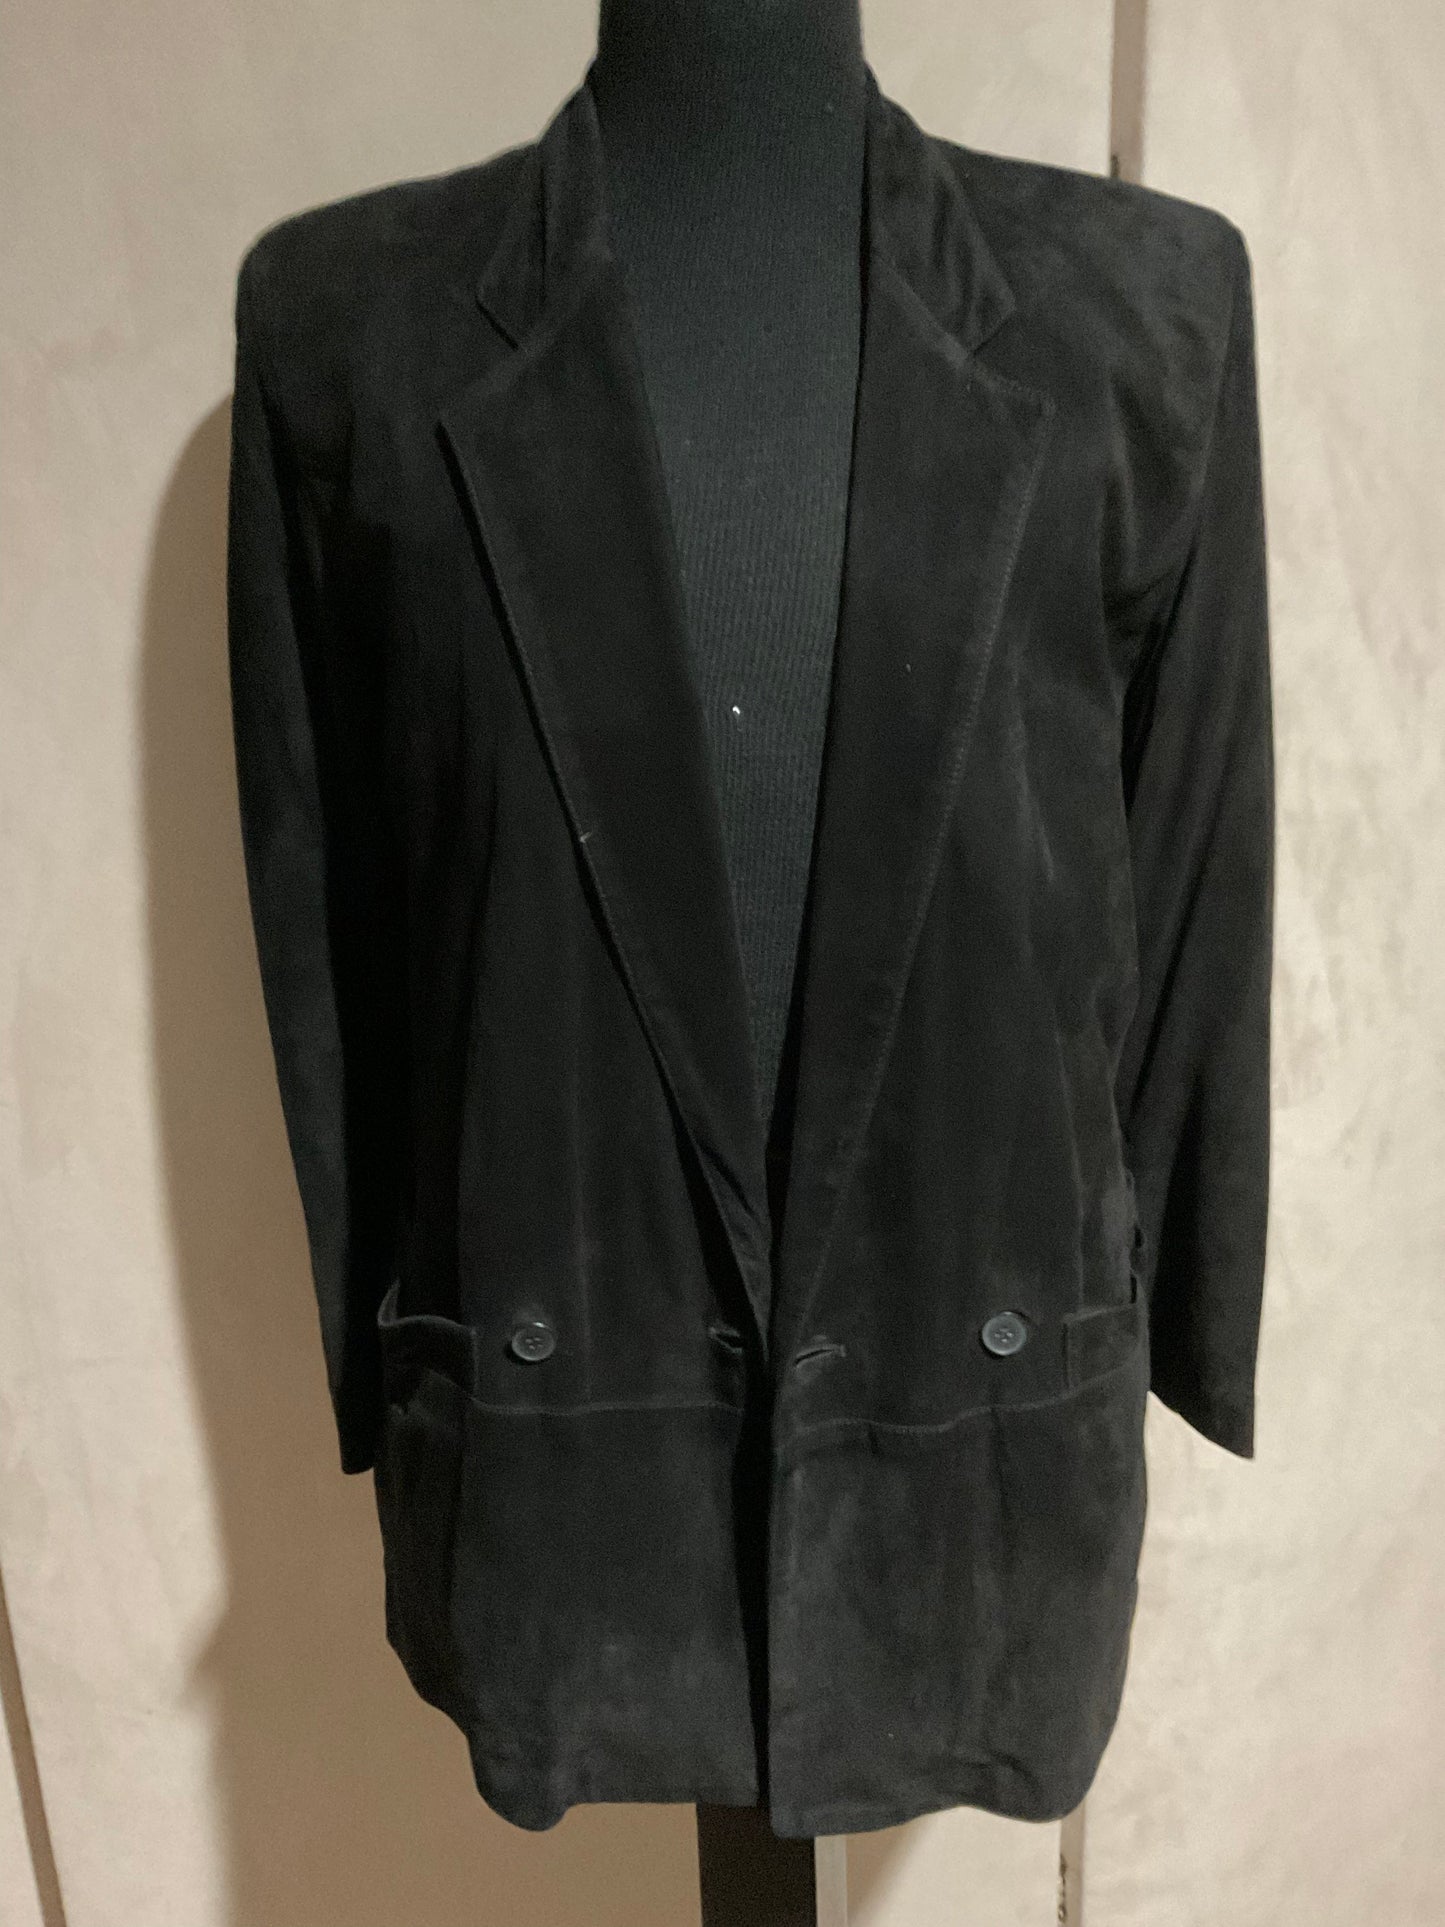 R P SUEDE DOUBLE BREASTED BLAZER JACKET / BLACK / MEDIUM / MADE IN ITALY